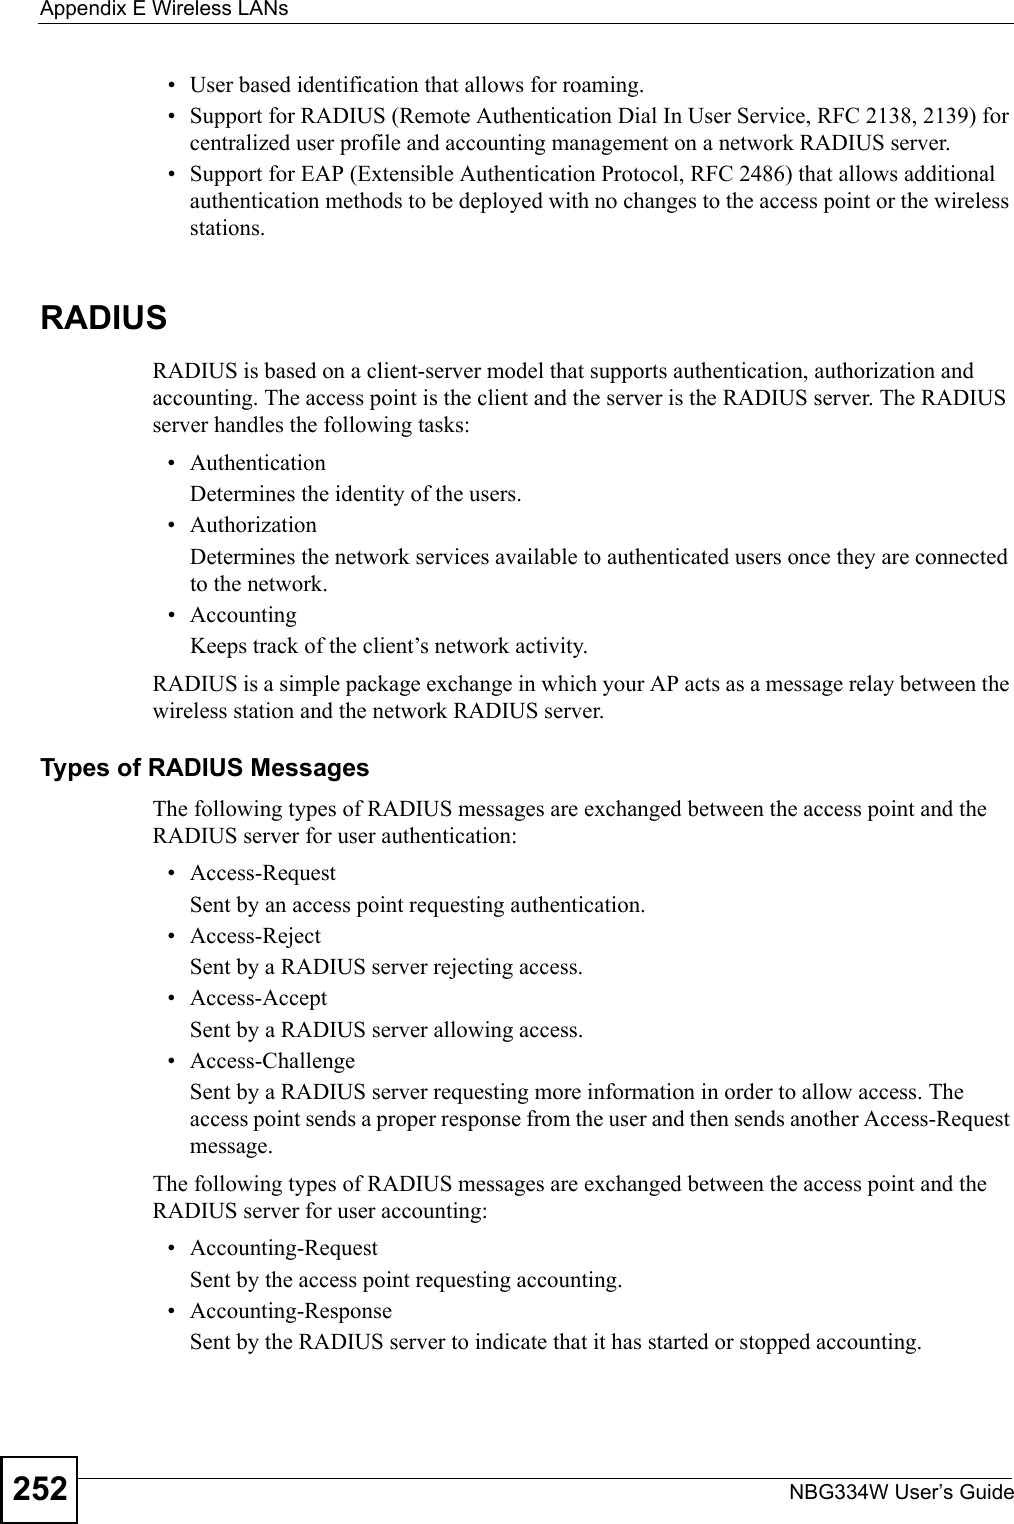 Appendix E Wireless LANsNBG334W User’s Guide252• User based identification that allows for roaming.• Support for RADIUS (Remote Authentication Dial In User Service, RFC 2138, 2139) for centralized user profile and accounting management on a network RADIUS server. • Support for EAP (Extensible Authentication Protocol, RFC 2486) that allows additional authentication methods to be deployed with no changes to the access point or the wireless stations. RADIUSRADIUS is based on a client-server model that supports authentication, authorization and accounting. The access point is the client and the server is the RADIUS server. The RADIUS server handles the following tasks:• Authentication Determines the identity of the users.• AuthorizationDetermines the network services available to authenticated users once they are connected to the network.• AccountingKeeps track of the client’s network activity. RADIUS is a simple package exchange in which your AP acts as a message relay between the wireless station and the network RADIUS server. Types of RADIUS MessagesThe following types of RADIUS messages are exchanged between the access point and the RADIUS server for user authentication:• Access-RequestSent by an access point requesting authentication.• Access-RejectSent by a RADIUS server rejecting access.• Access-AcceptSent by a RADIUS server allowing access. • Access-ChallengeSent by a RADIUS server requesting more information in order to allow access. The access point sends a proper response from the user and then sends another Access-Request message. The following types of RADIUS messages are exchanged between the access point and the RADIUS server for user accounting:• Accounting-RequestSent by the access point requesting accounting.• Accounting-ResponseSent by the RADIUS server to indicate that it has started or stopped accounting. 